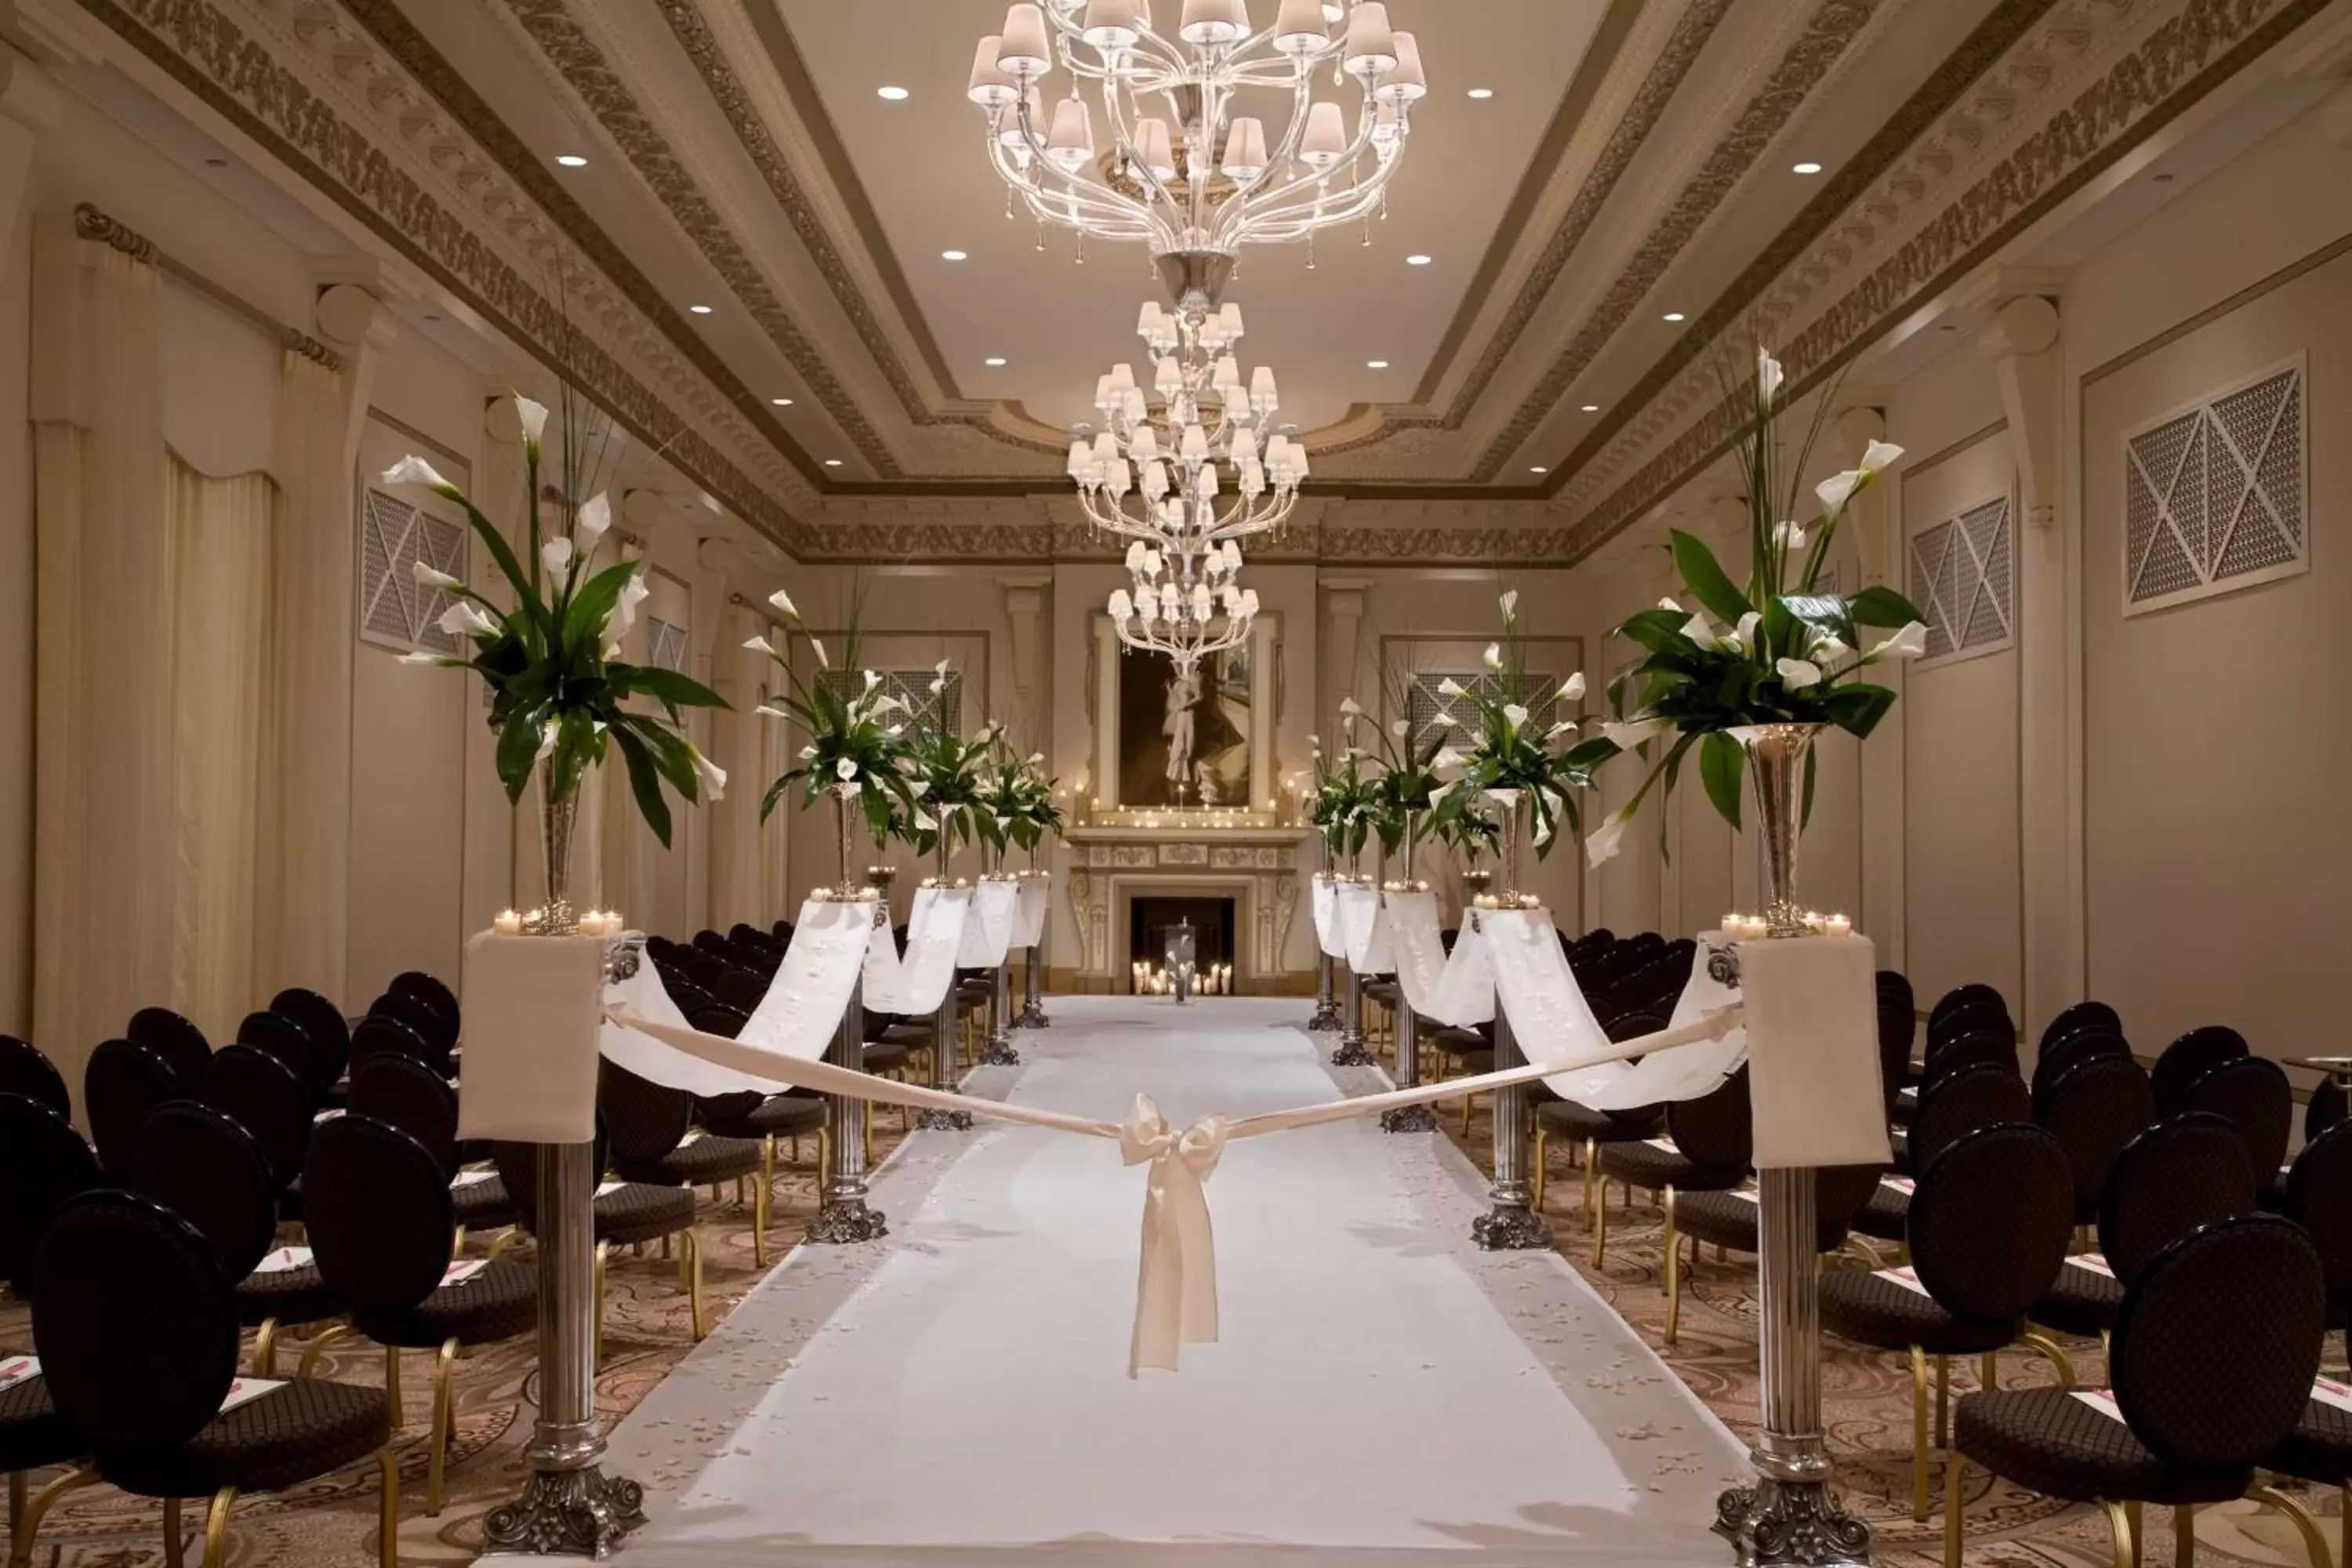 Meeting/conference room, Banquet Facilities in The Palmer House Hilton